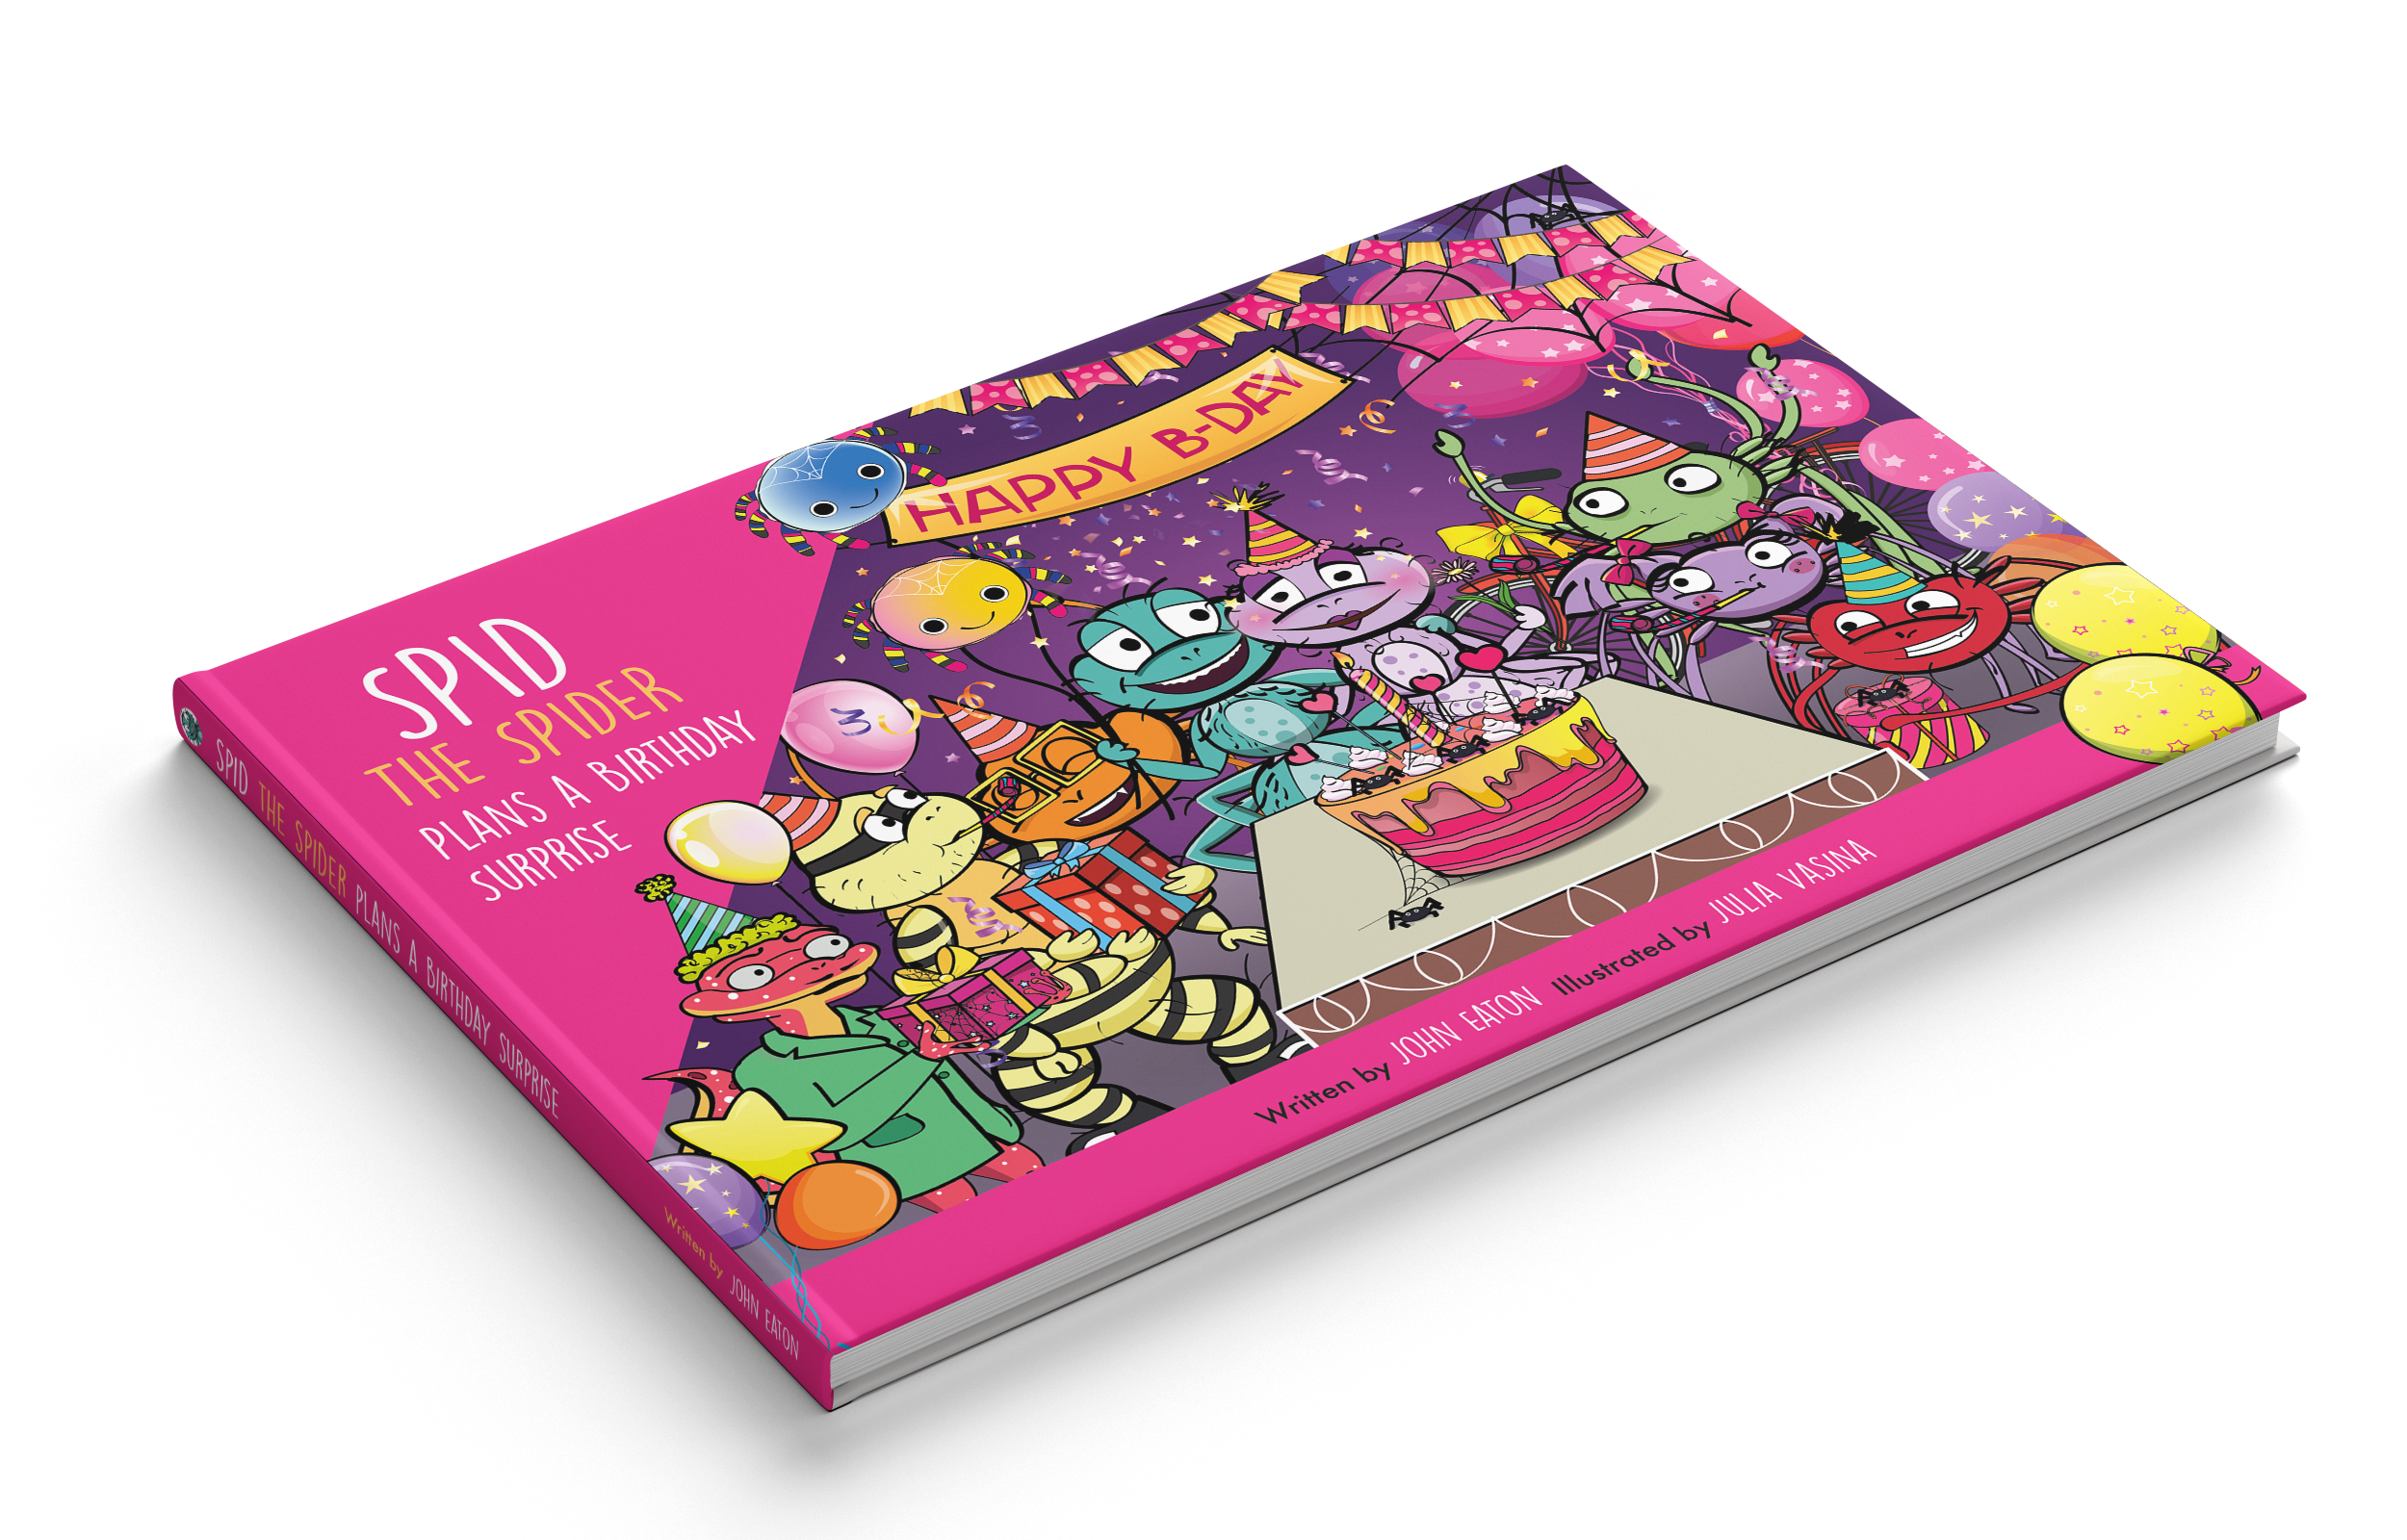 spid plans a birthday surprise physical book mockup